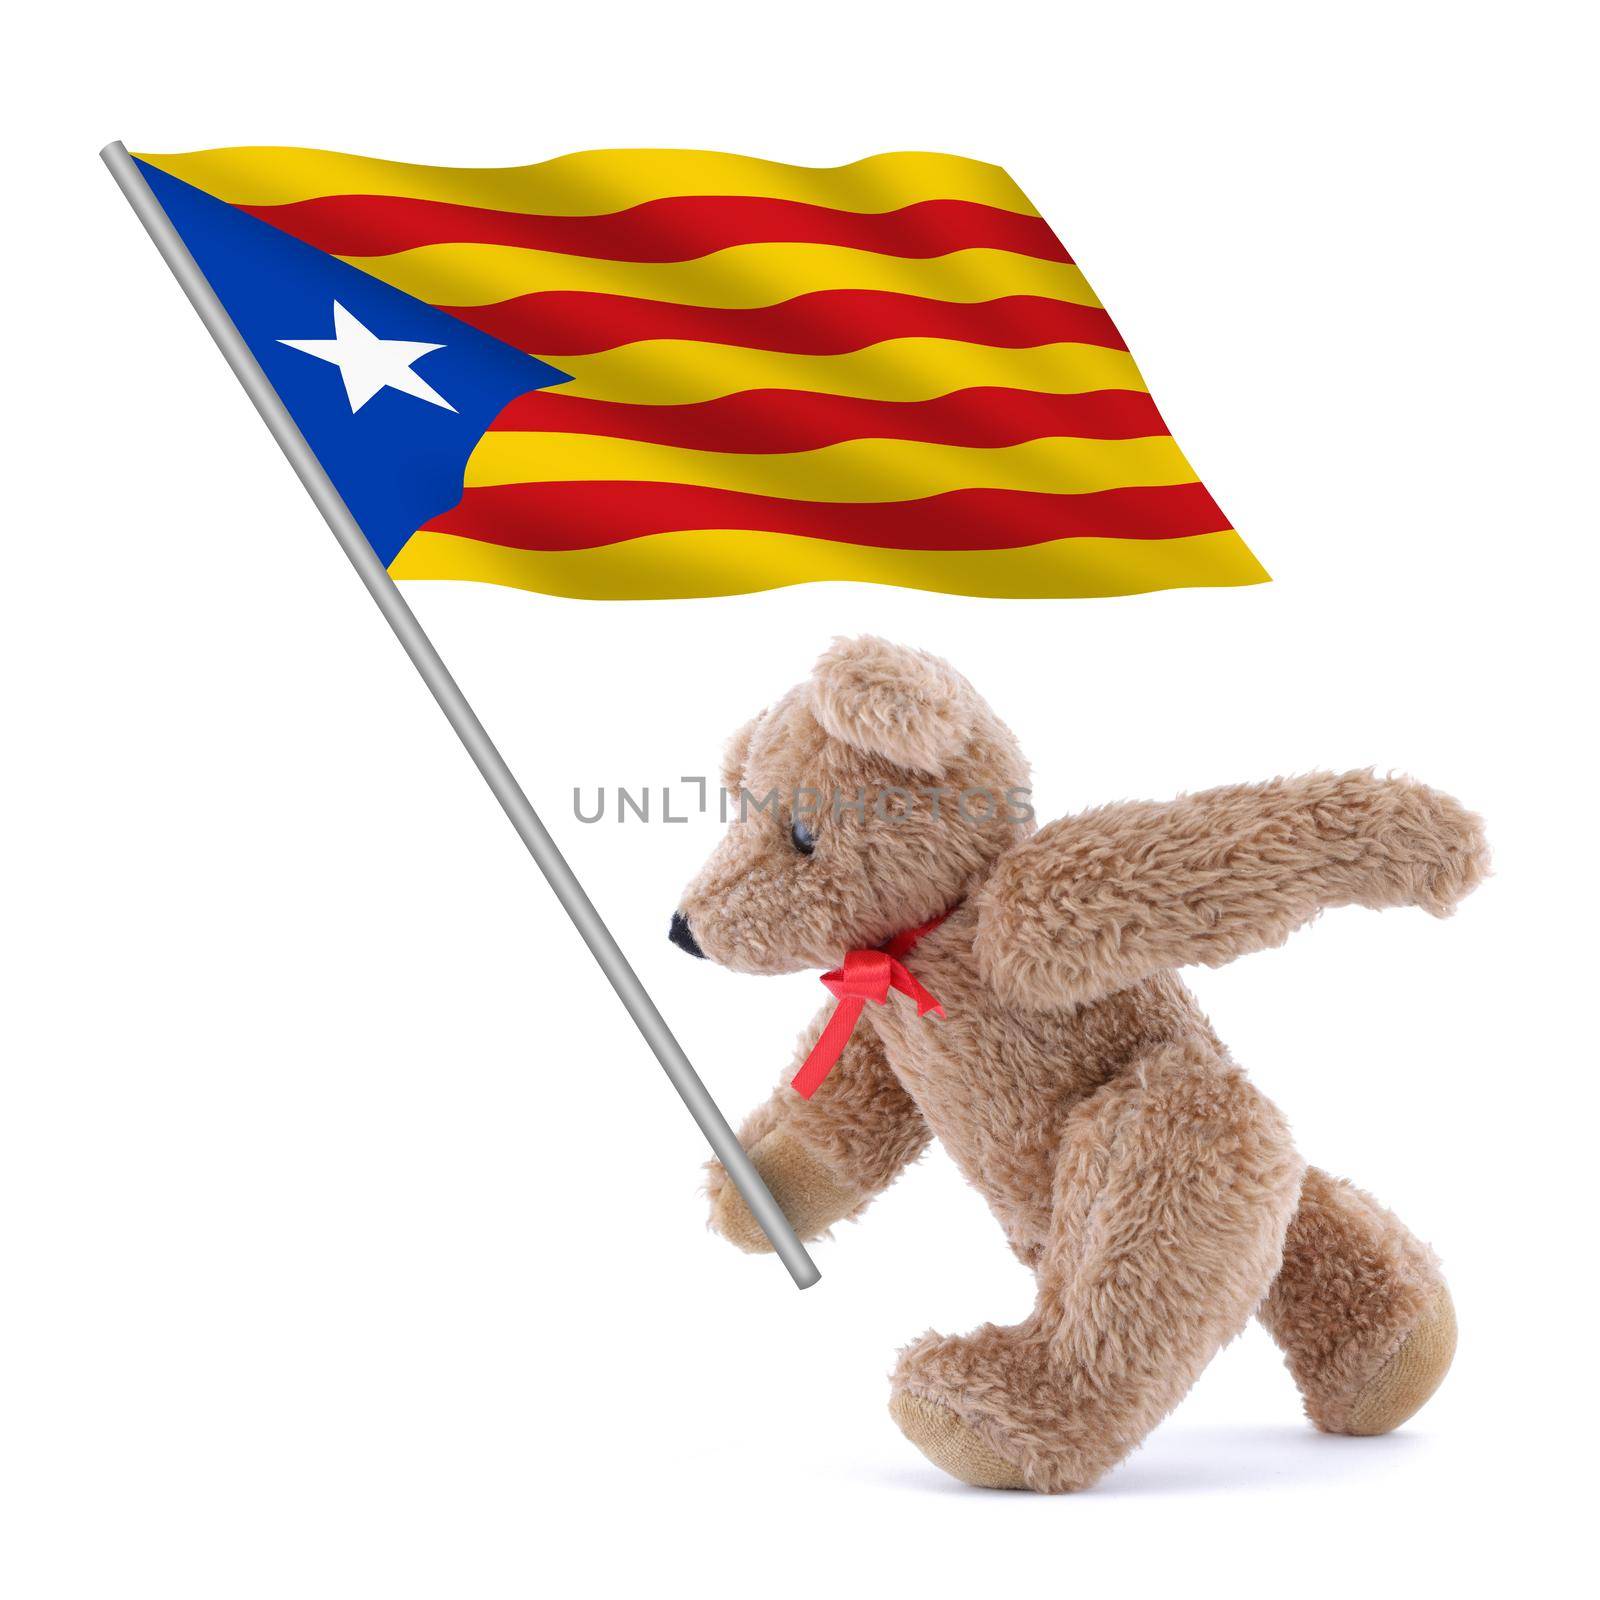 A Catalonia Independence flag being carried by a cute teddy bear red yellow blue white star Estelada